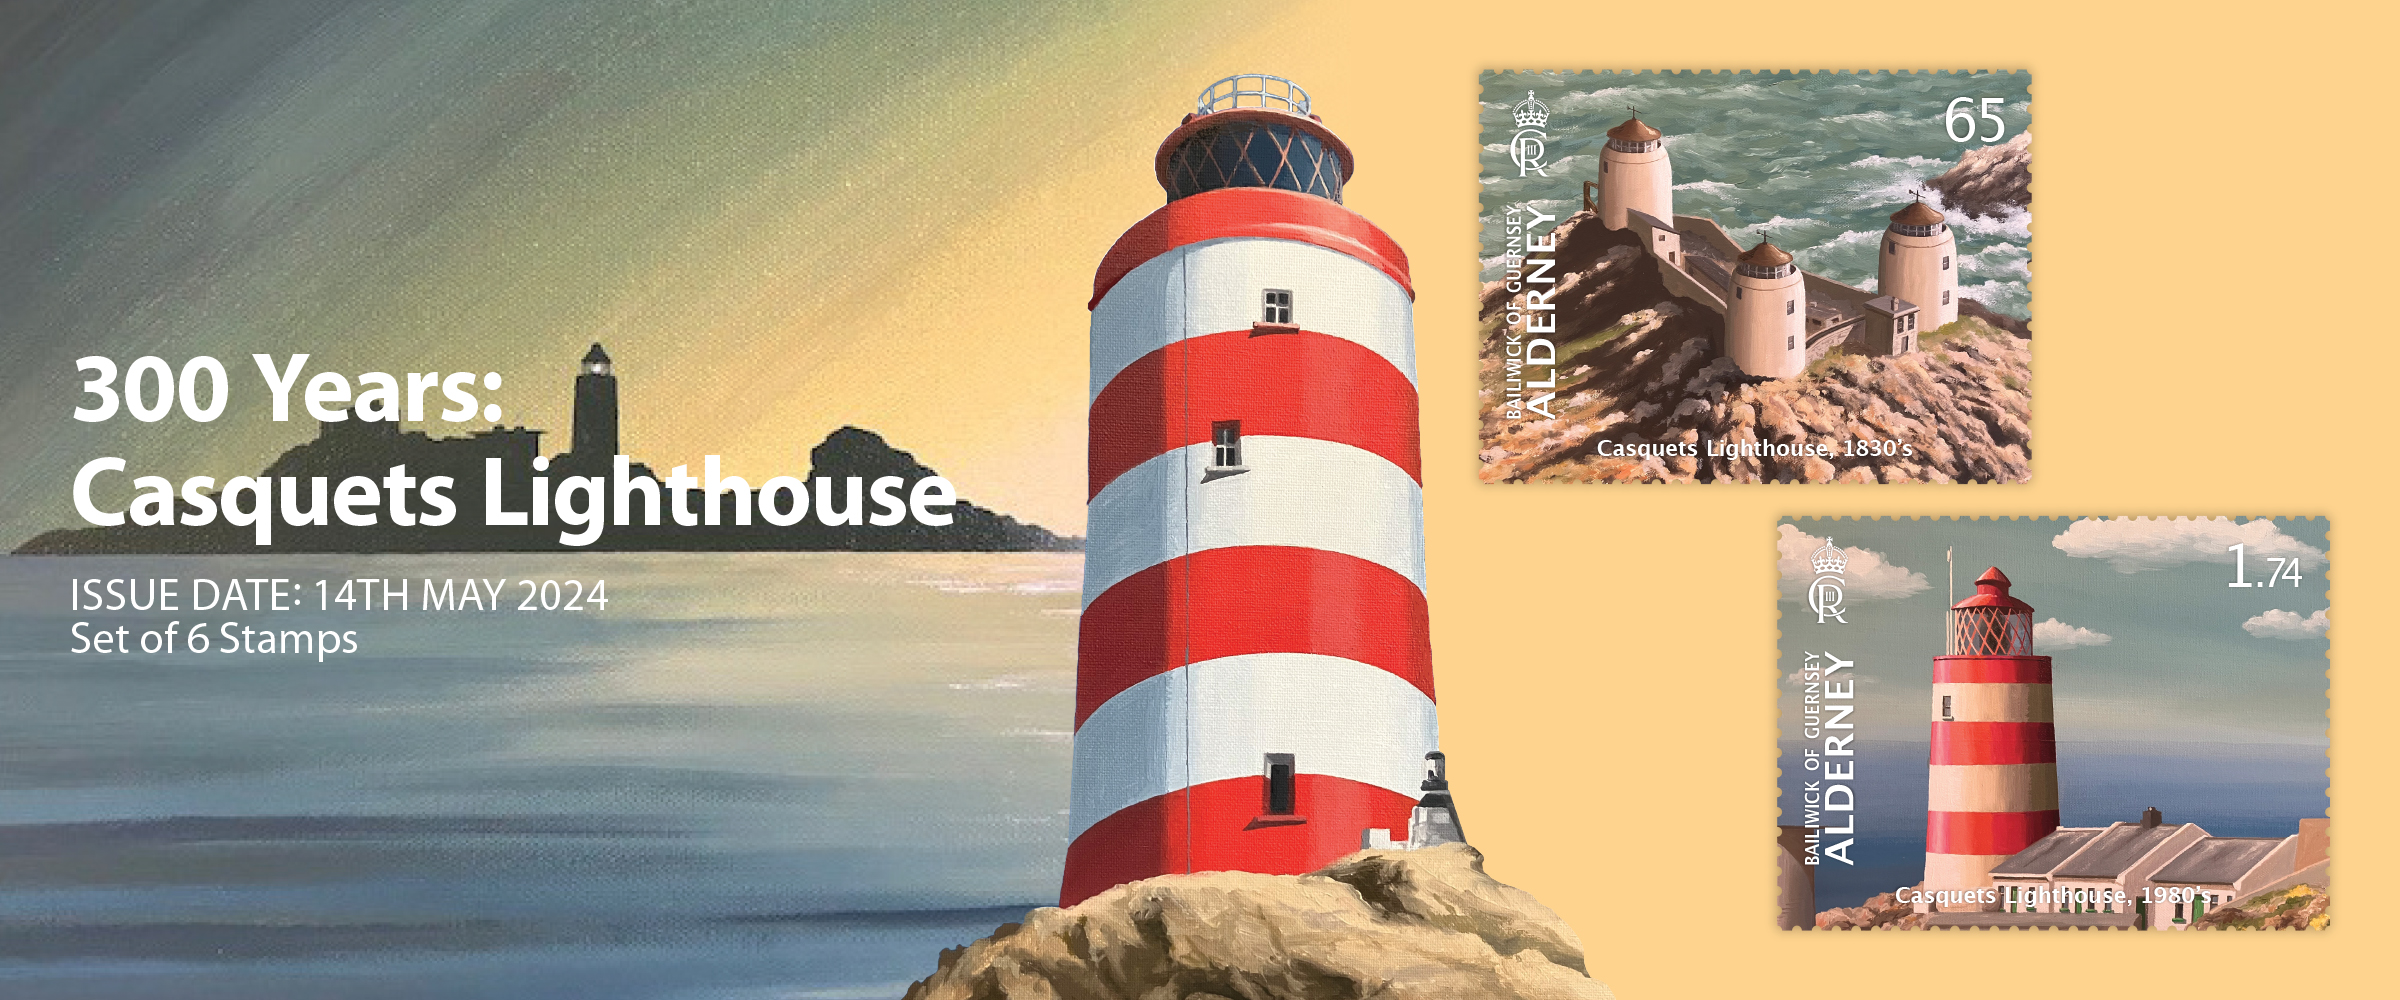 300 Years: Casquets Lighthouse